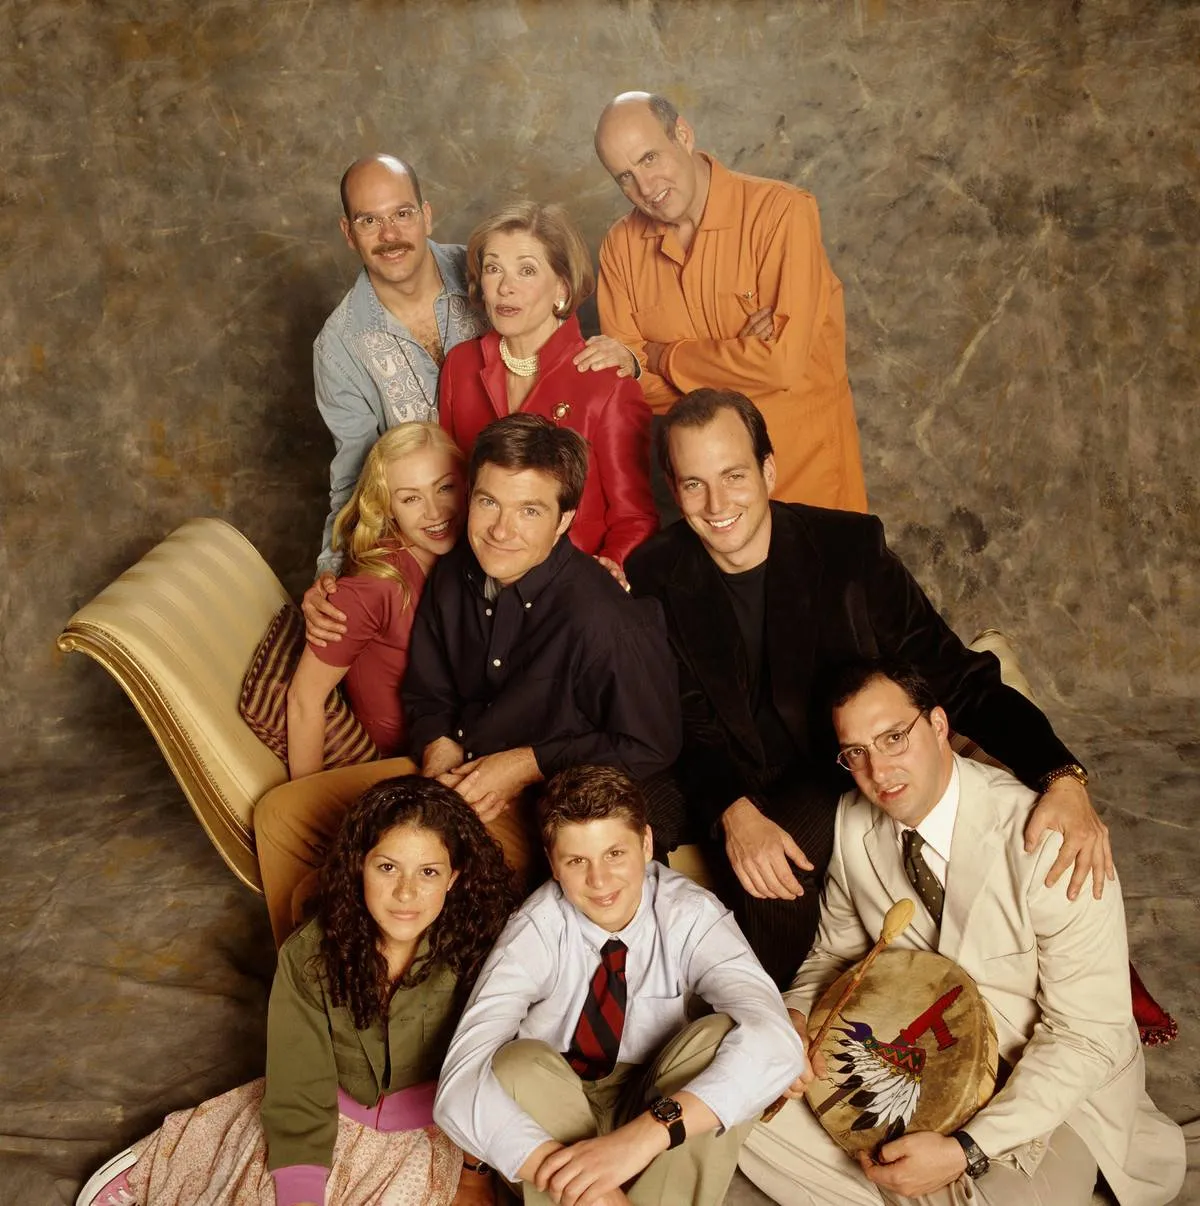 arrested development cast posing for a photo